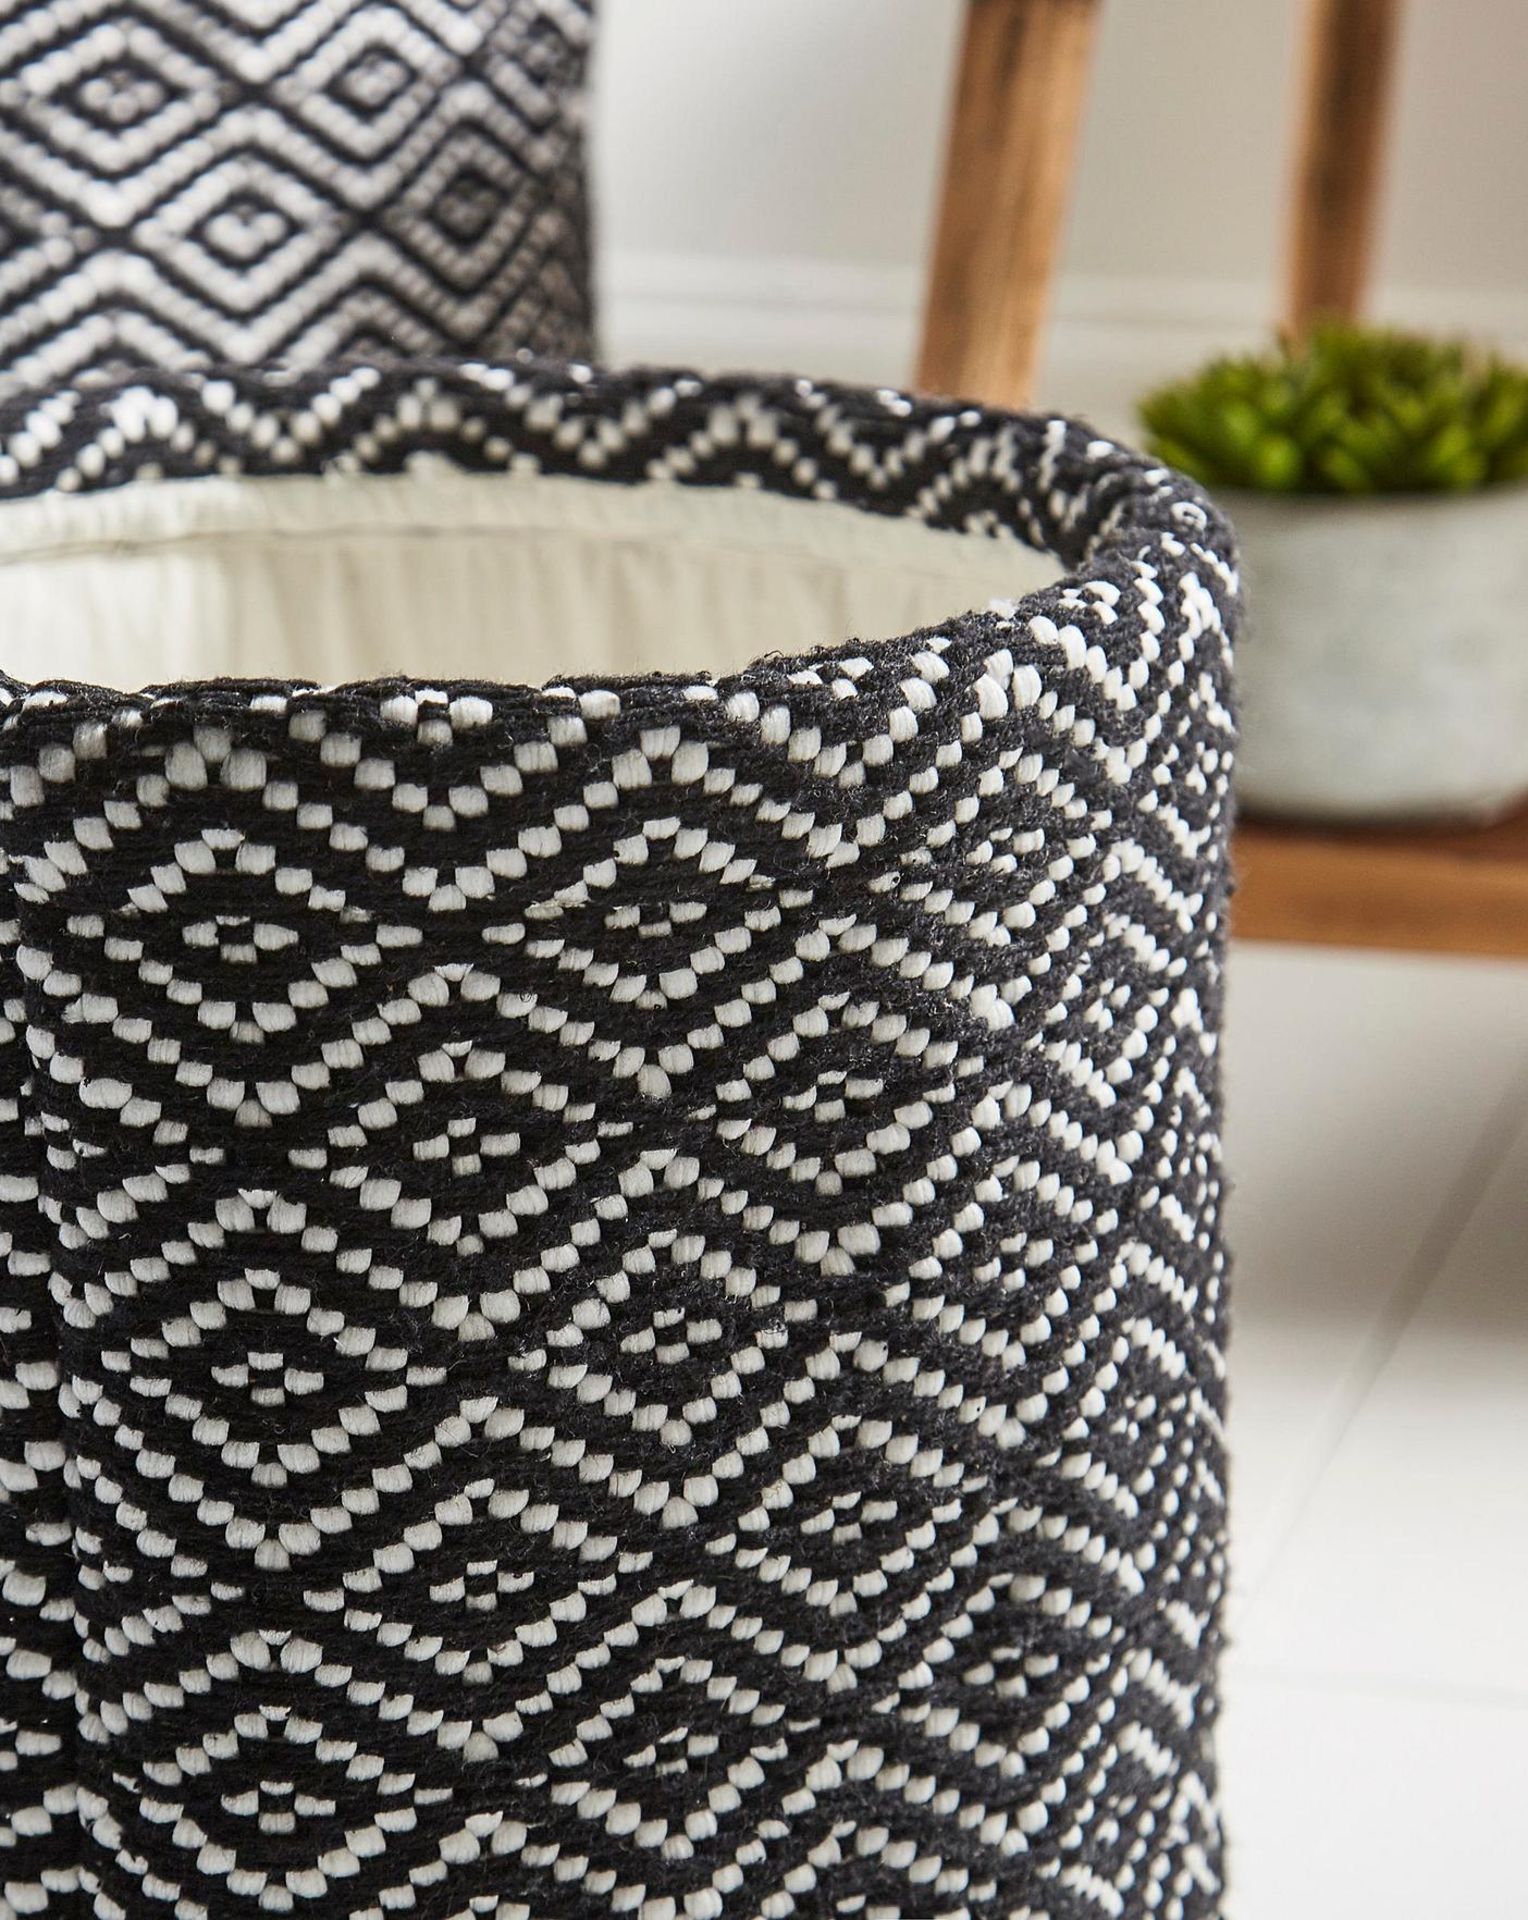 3x BRAND NEW Set of 2 Monochrome Woven Baskets. RRP £40 EACH. These lovely monochrome woven - Image 2 of 2